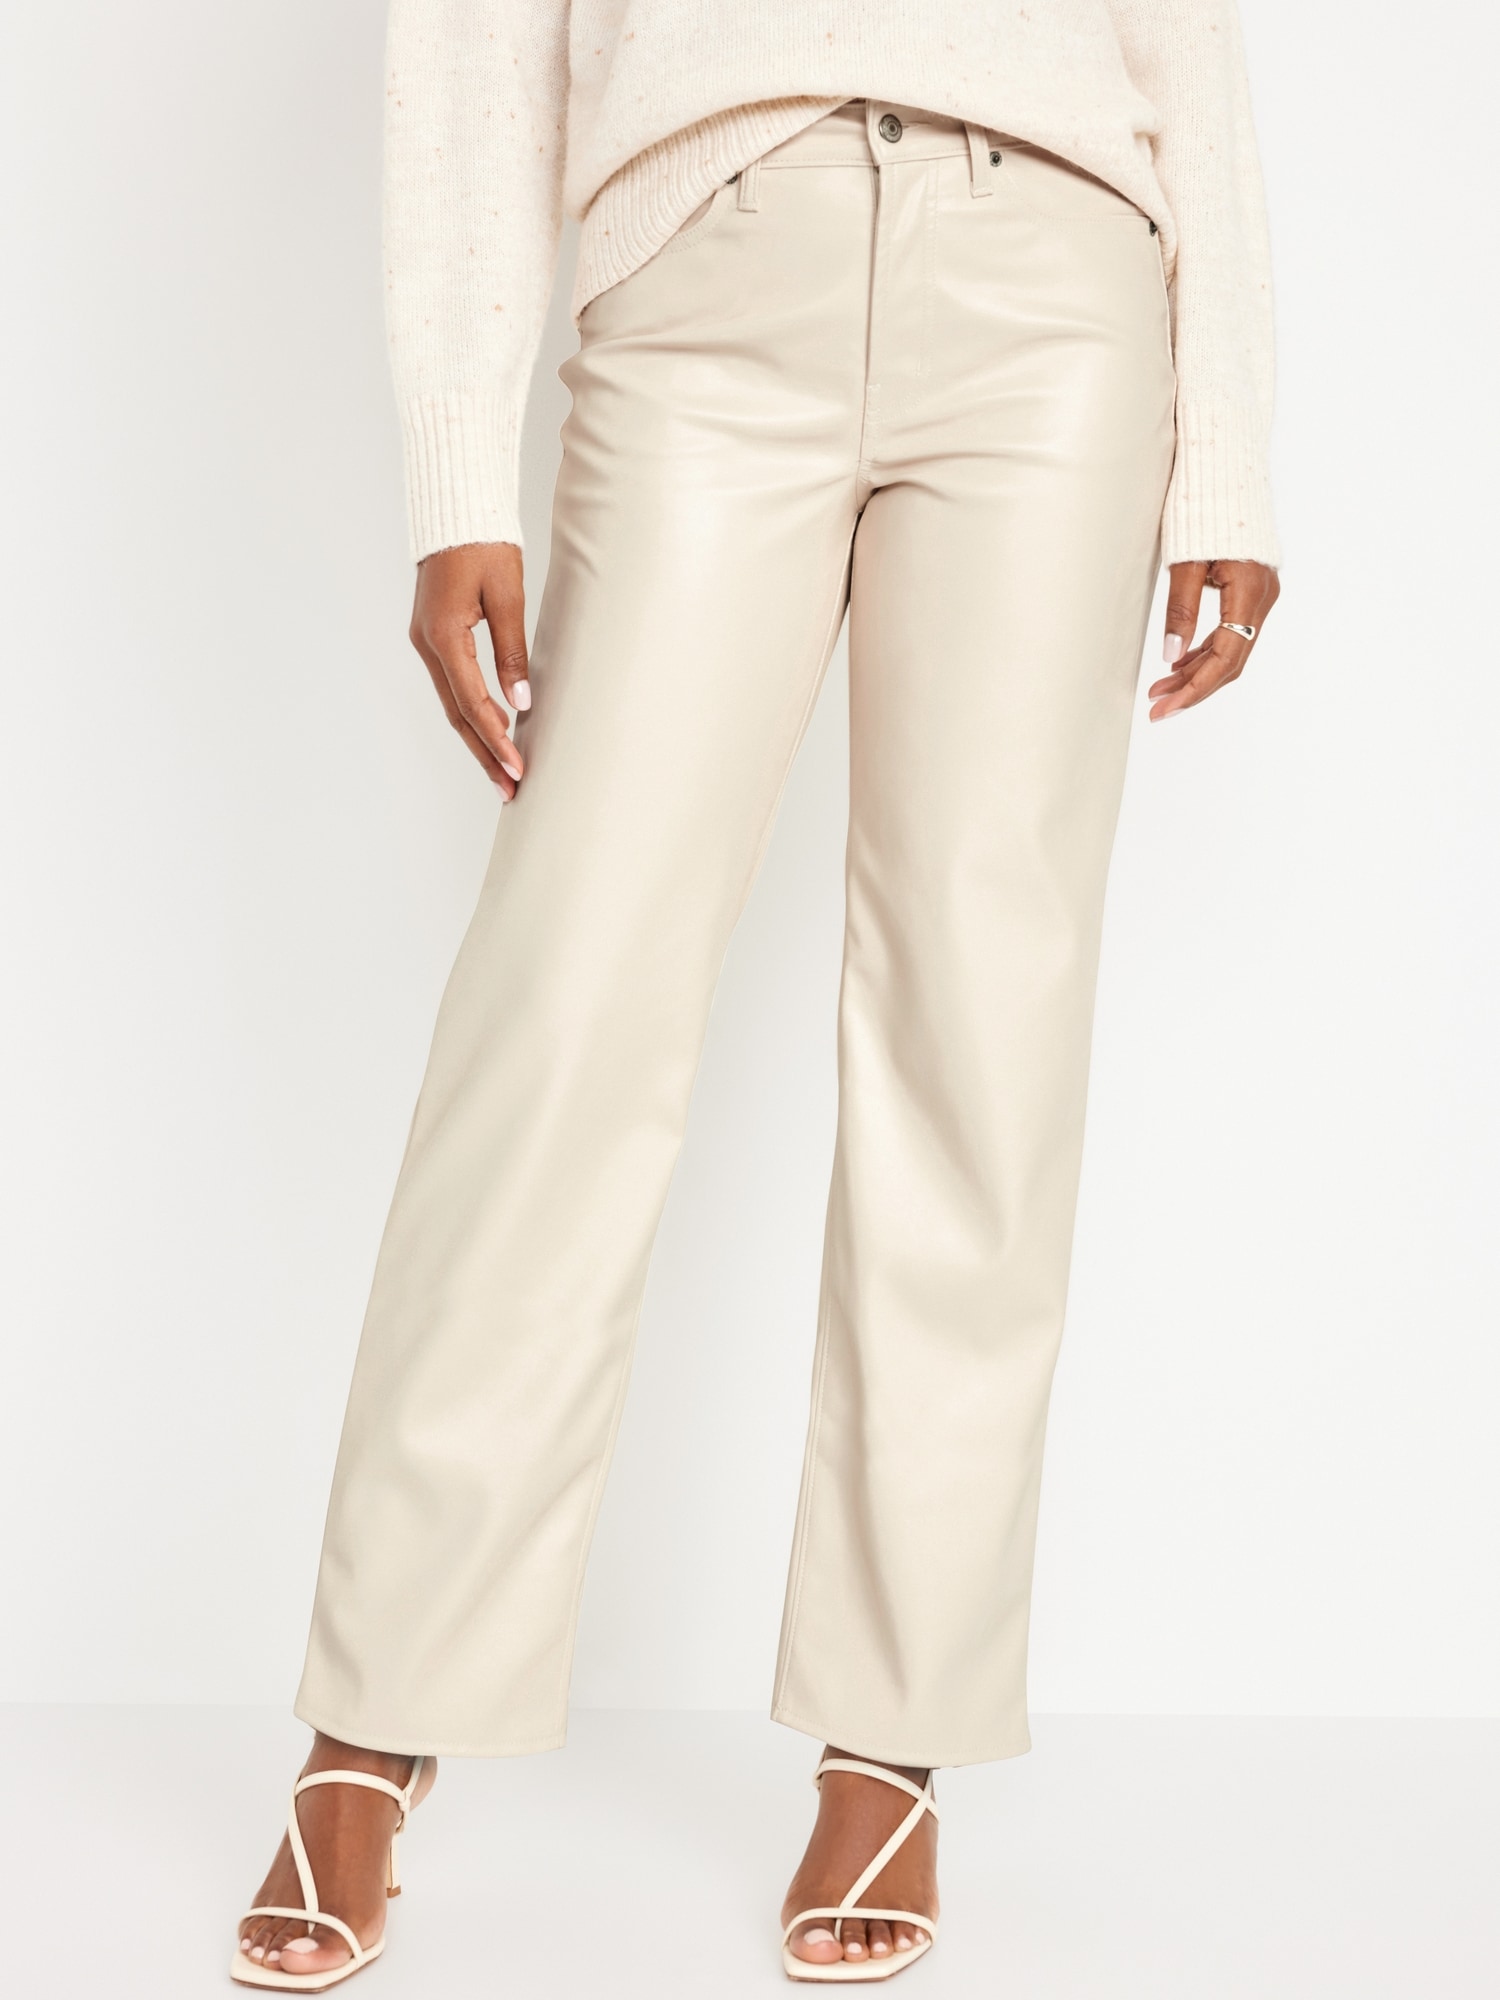 High-Waisted OG Loose Faux-Leather Pants